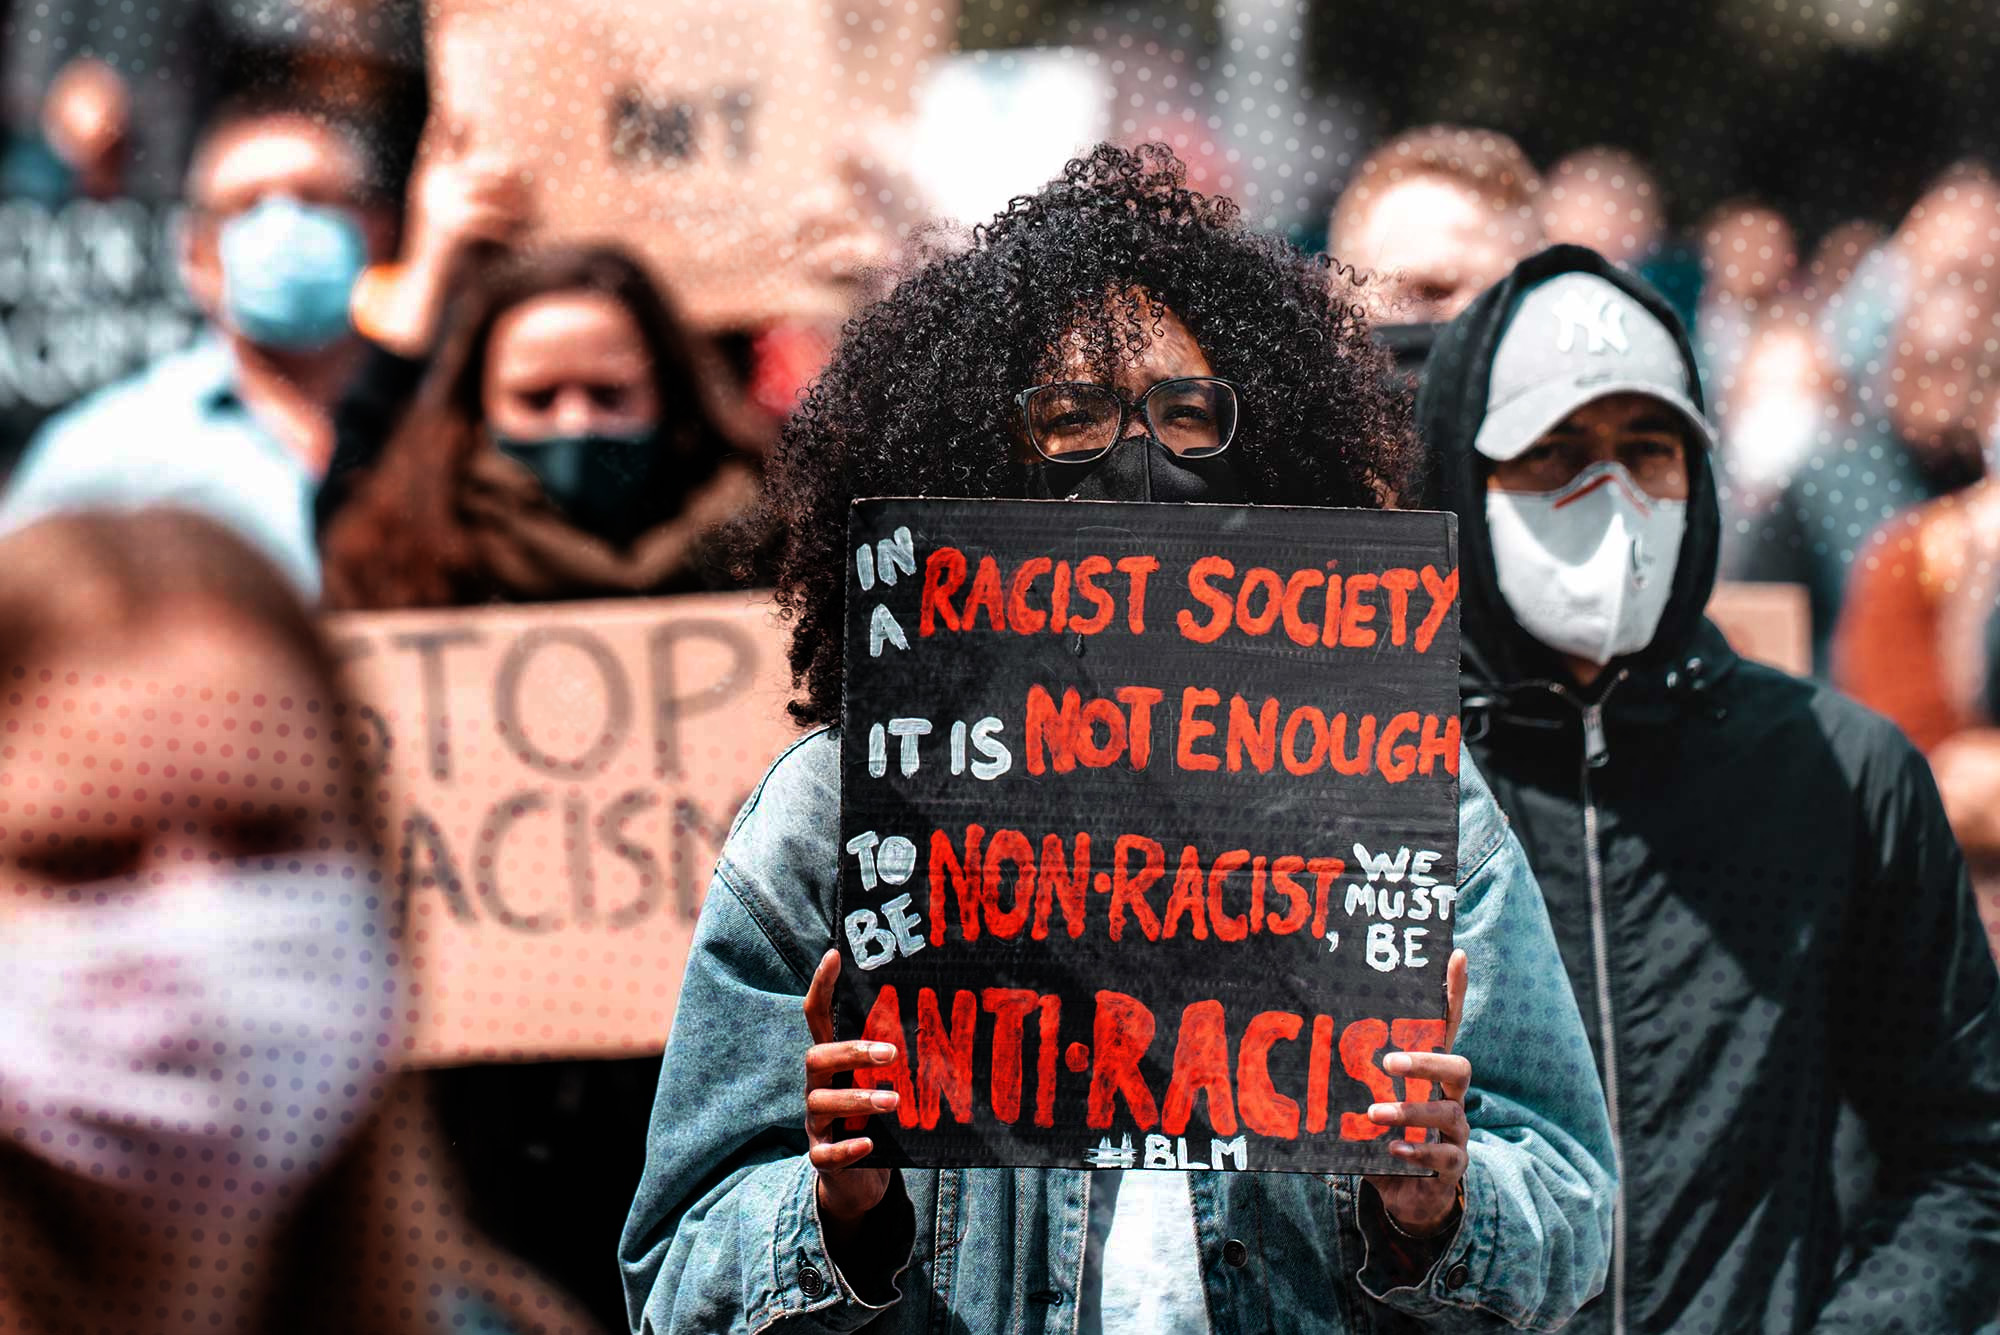 Photo of an African American woman holding a sign that says "In a racist society, it's not enough to be non-racist. We must be anti-racist. #blm" at a protest